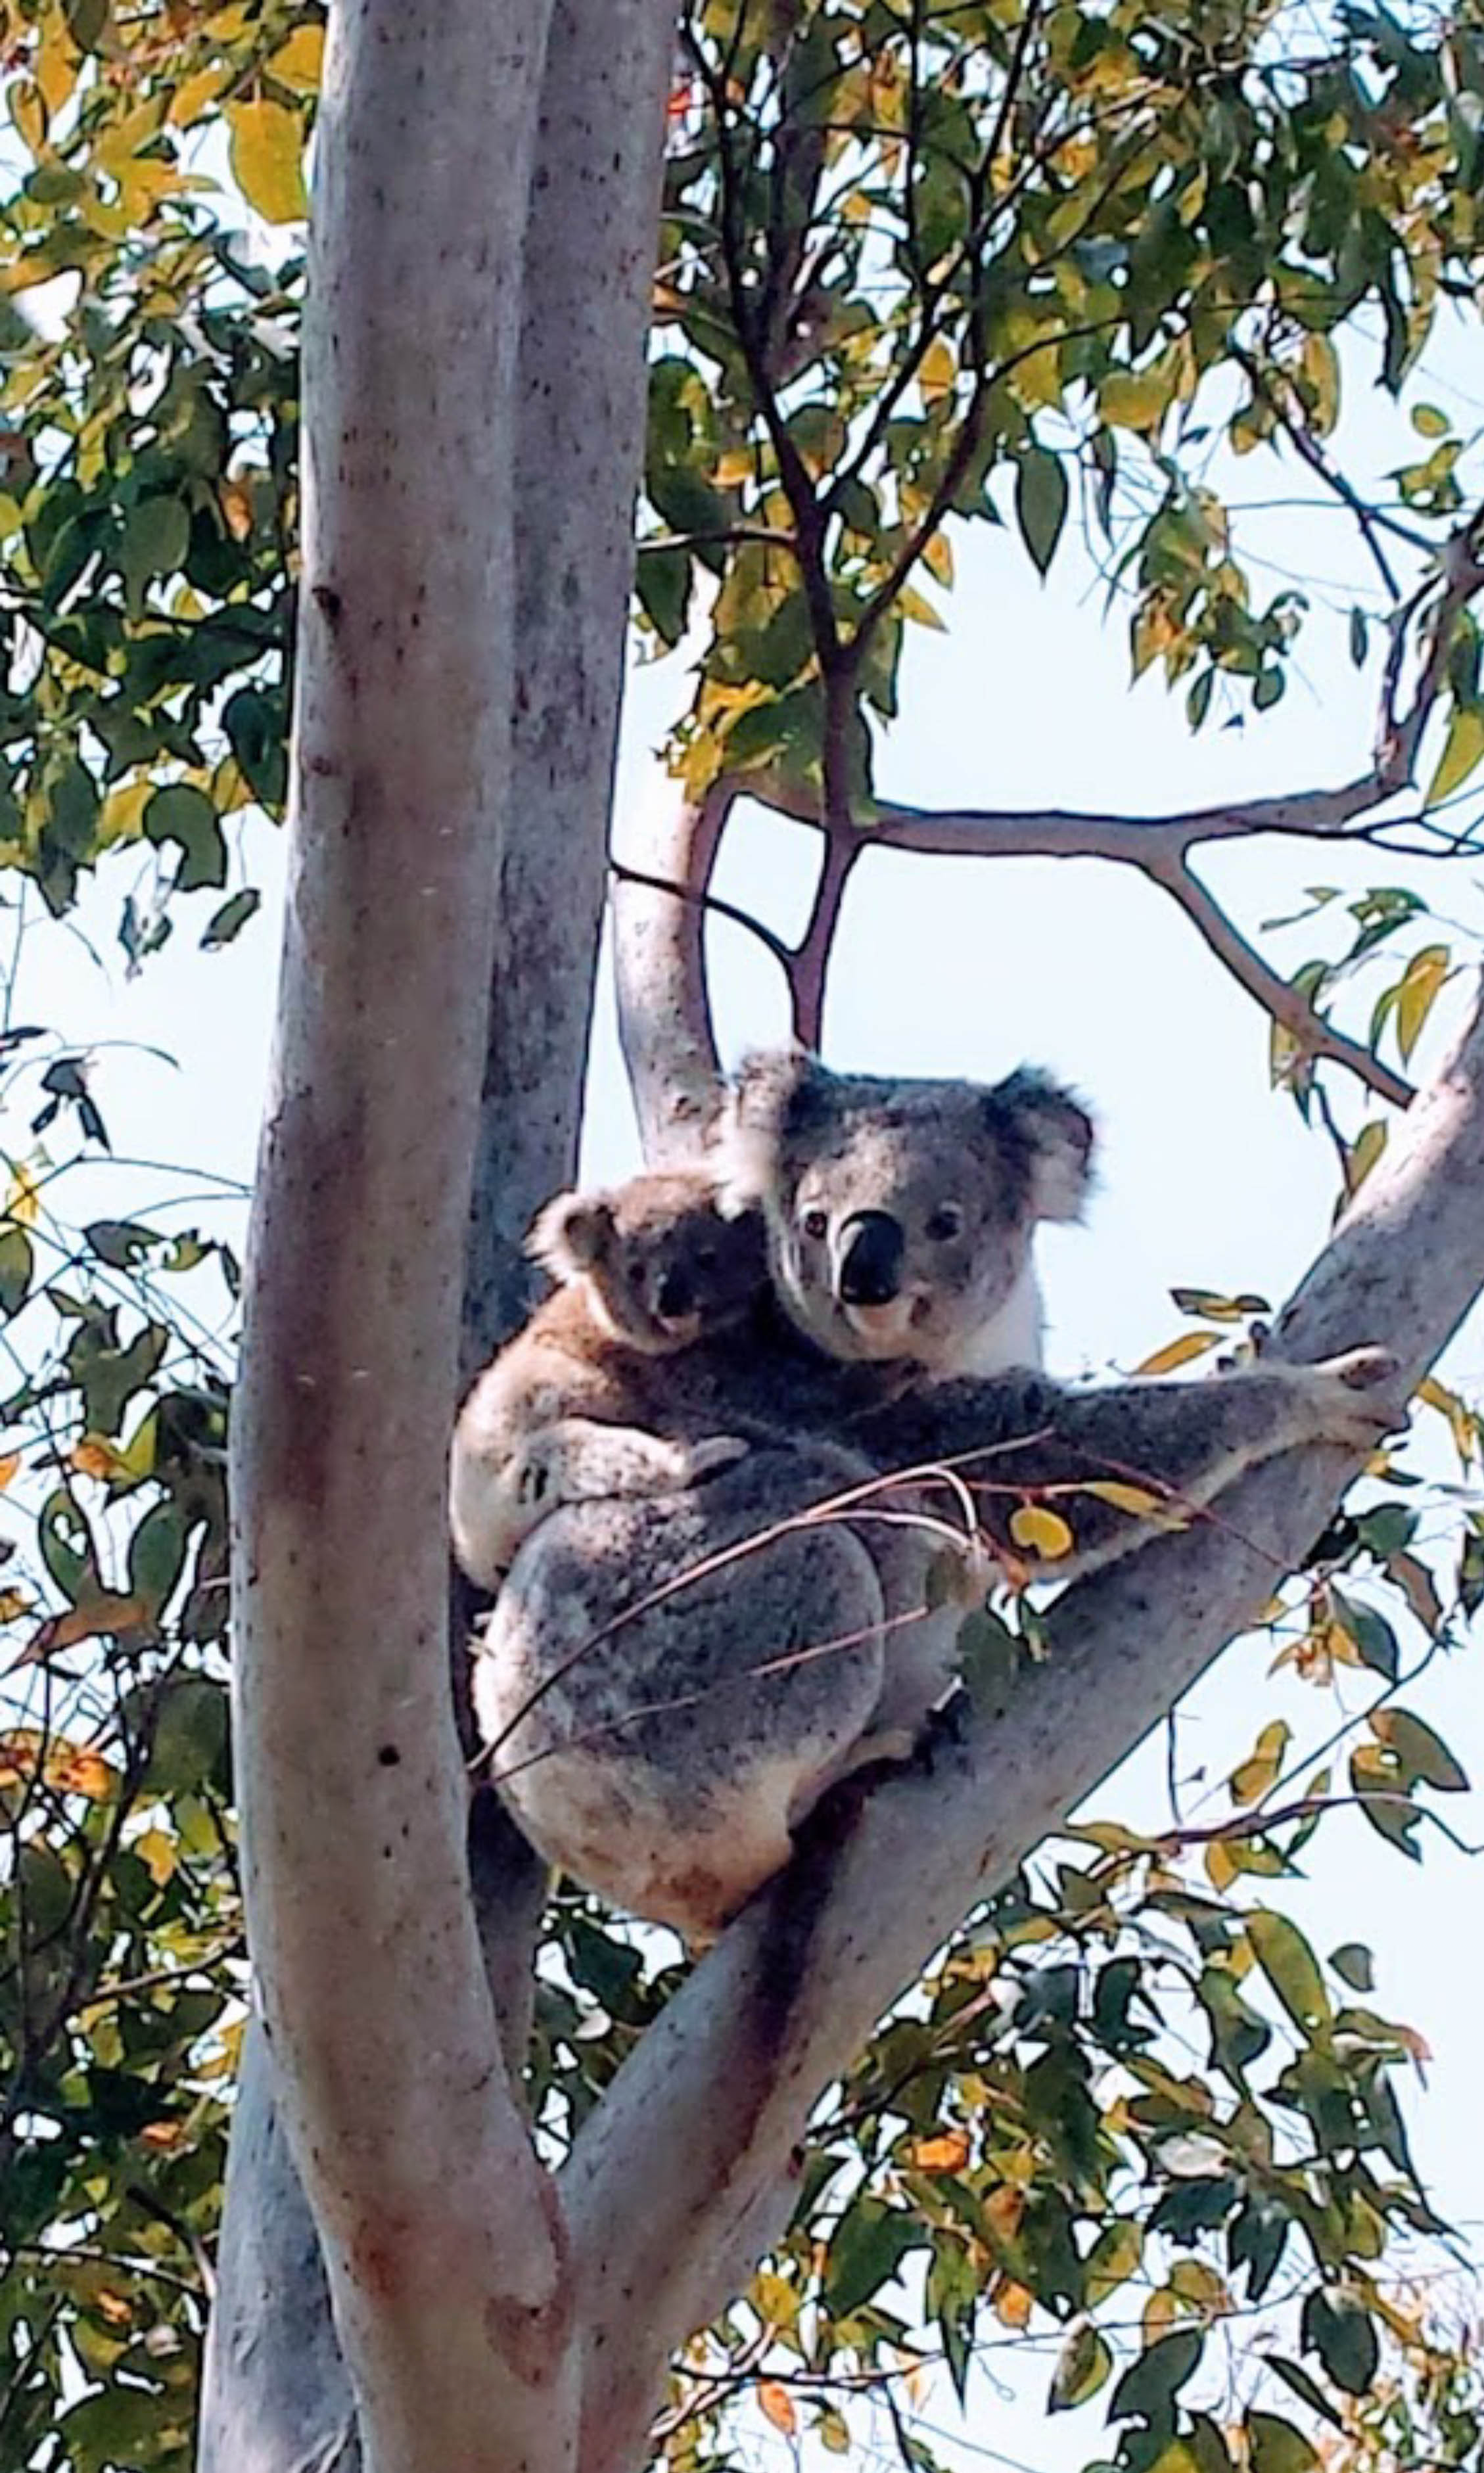  A local resident pleads for a better life for Koalas!